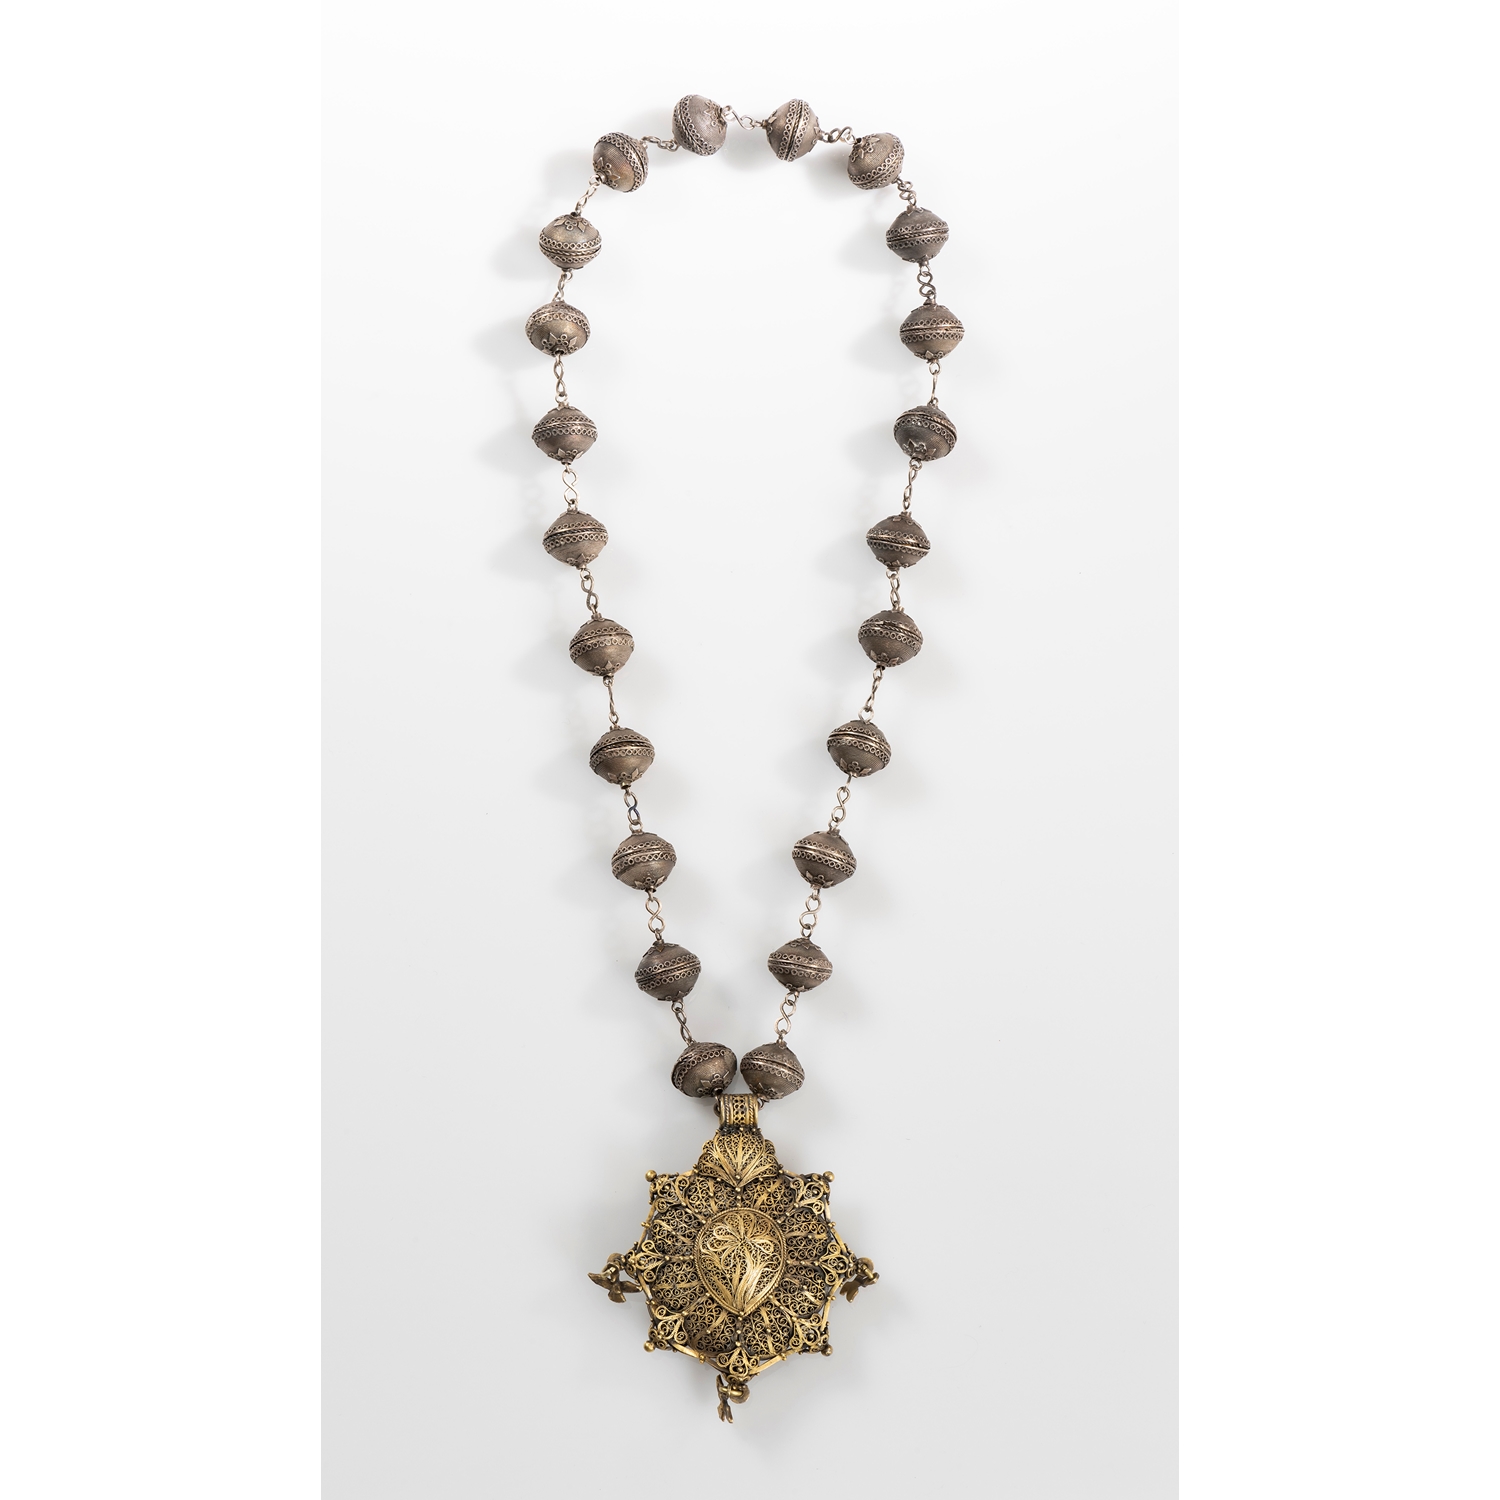 UNIQUE NECKLACE COMPOSED OF A SICILIAN MONUMENTAL PROCESSION ROSARY AND A CASTILLAN PENDANT FROM A TRADITIONAL COSTUME